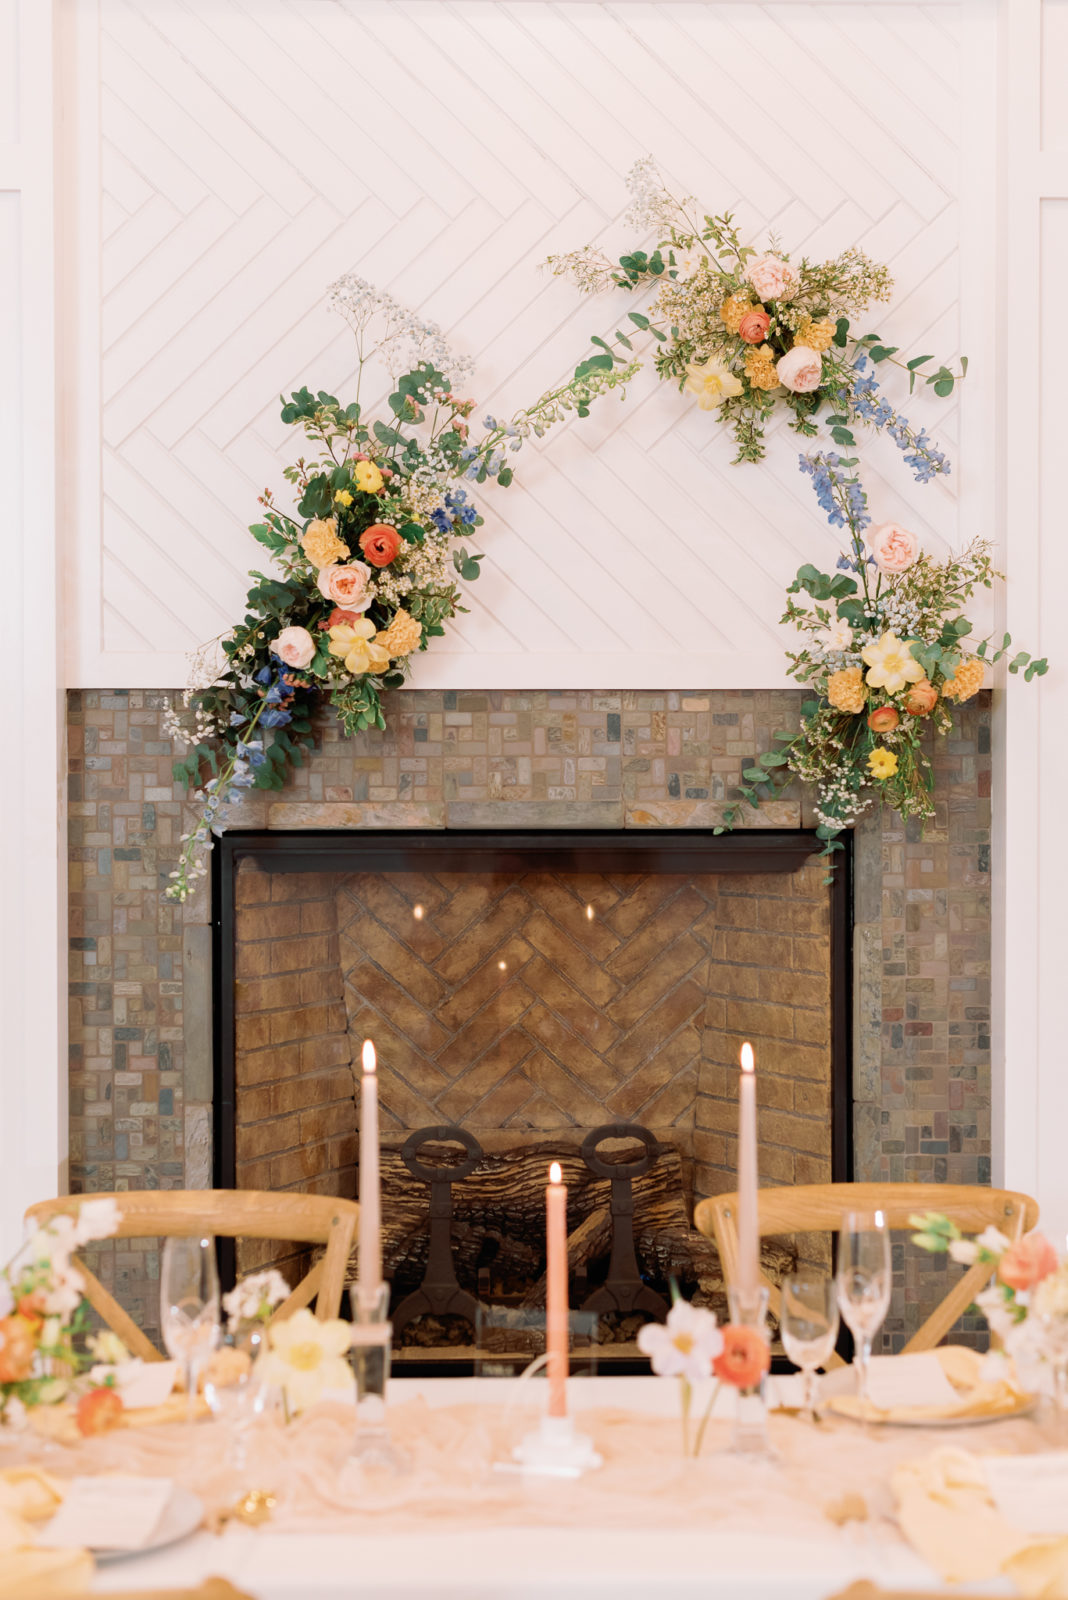 floral arch at spring wedding inspiration, wedding reception table